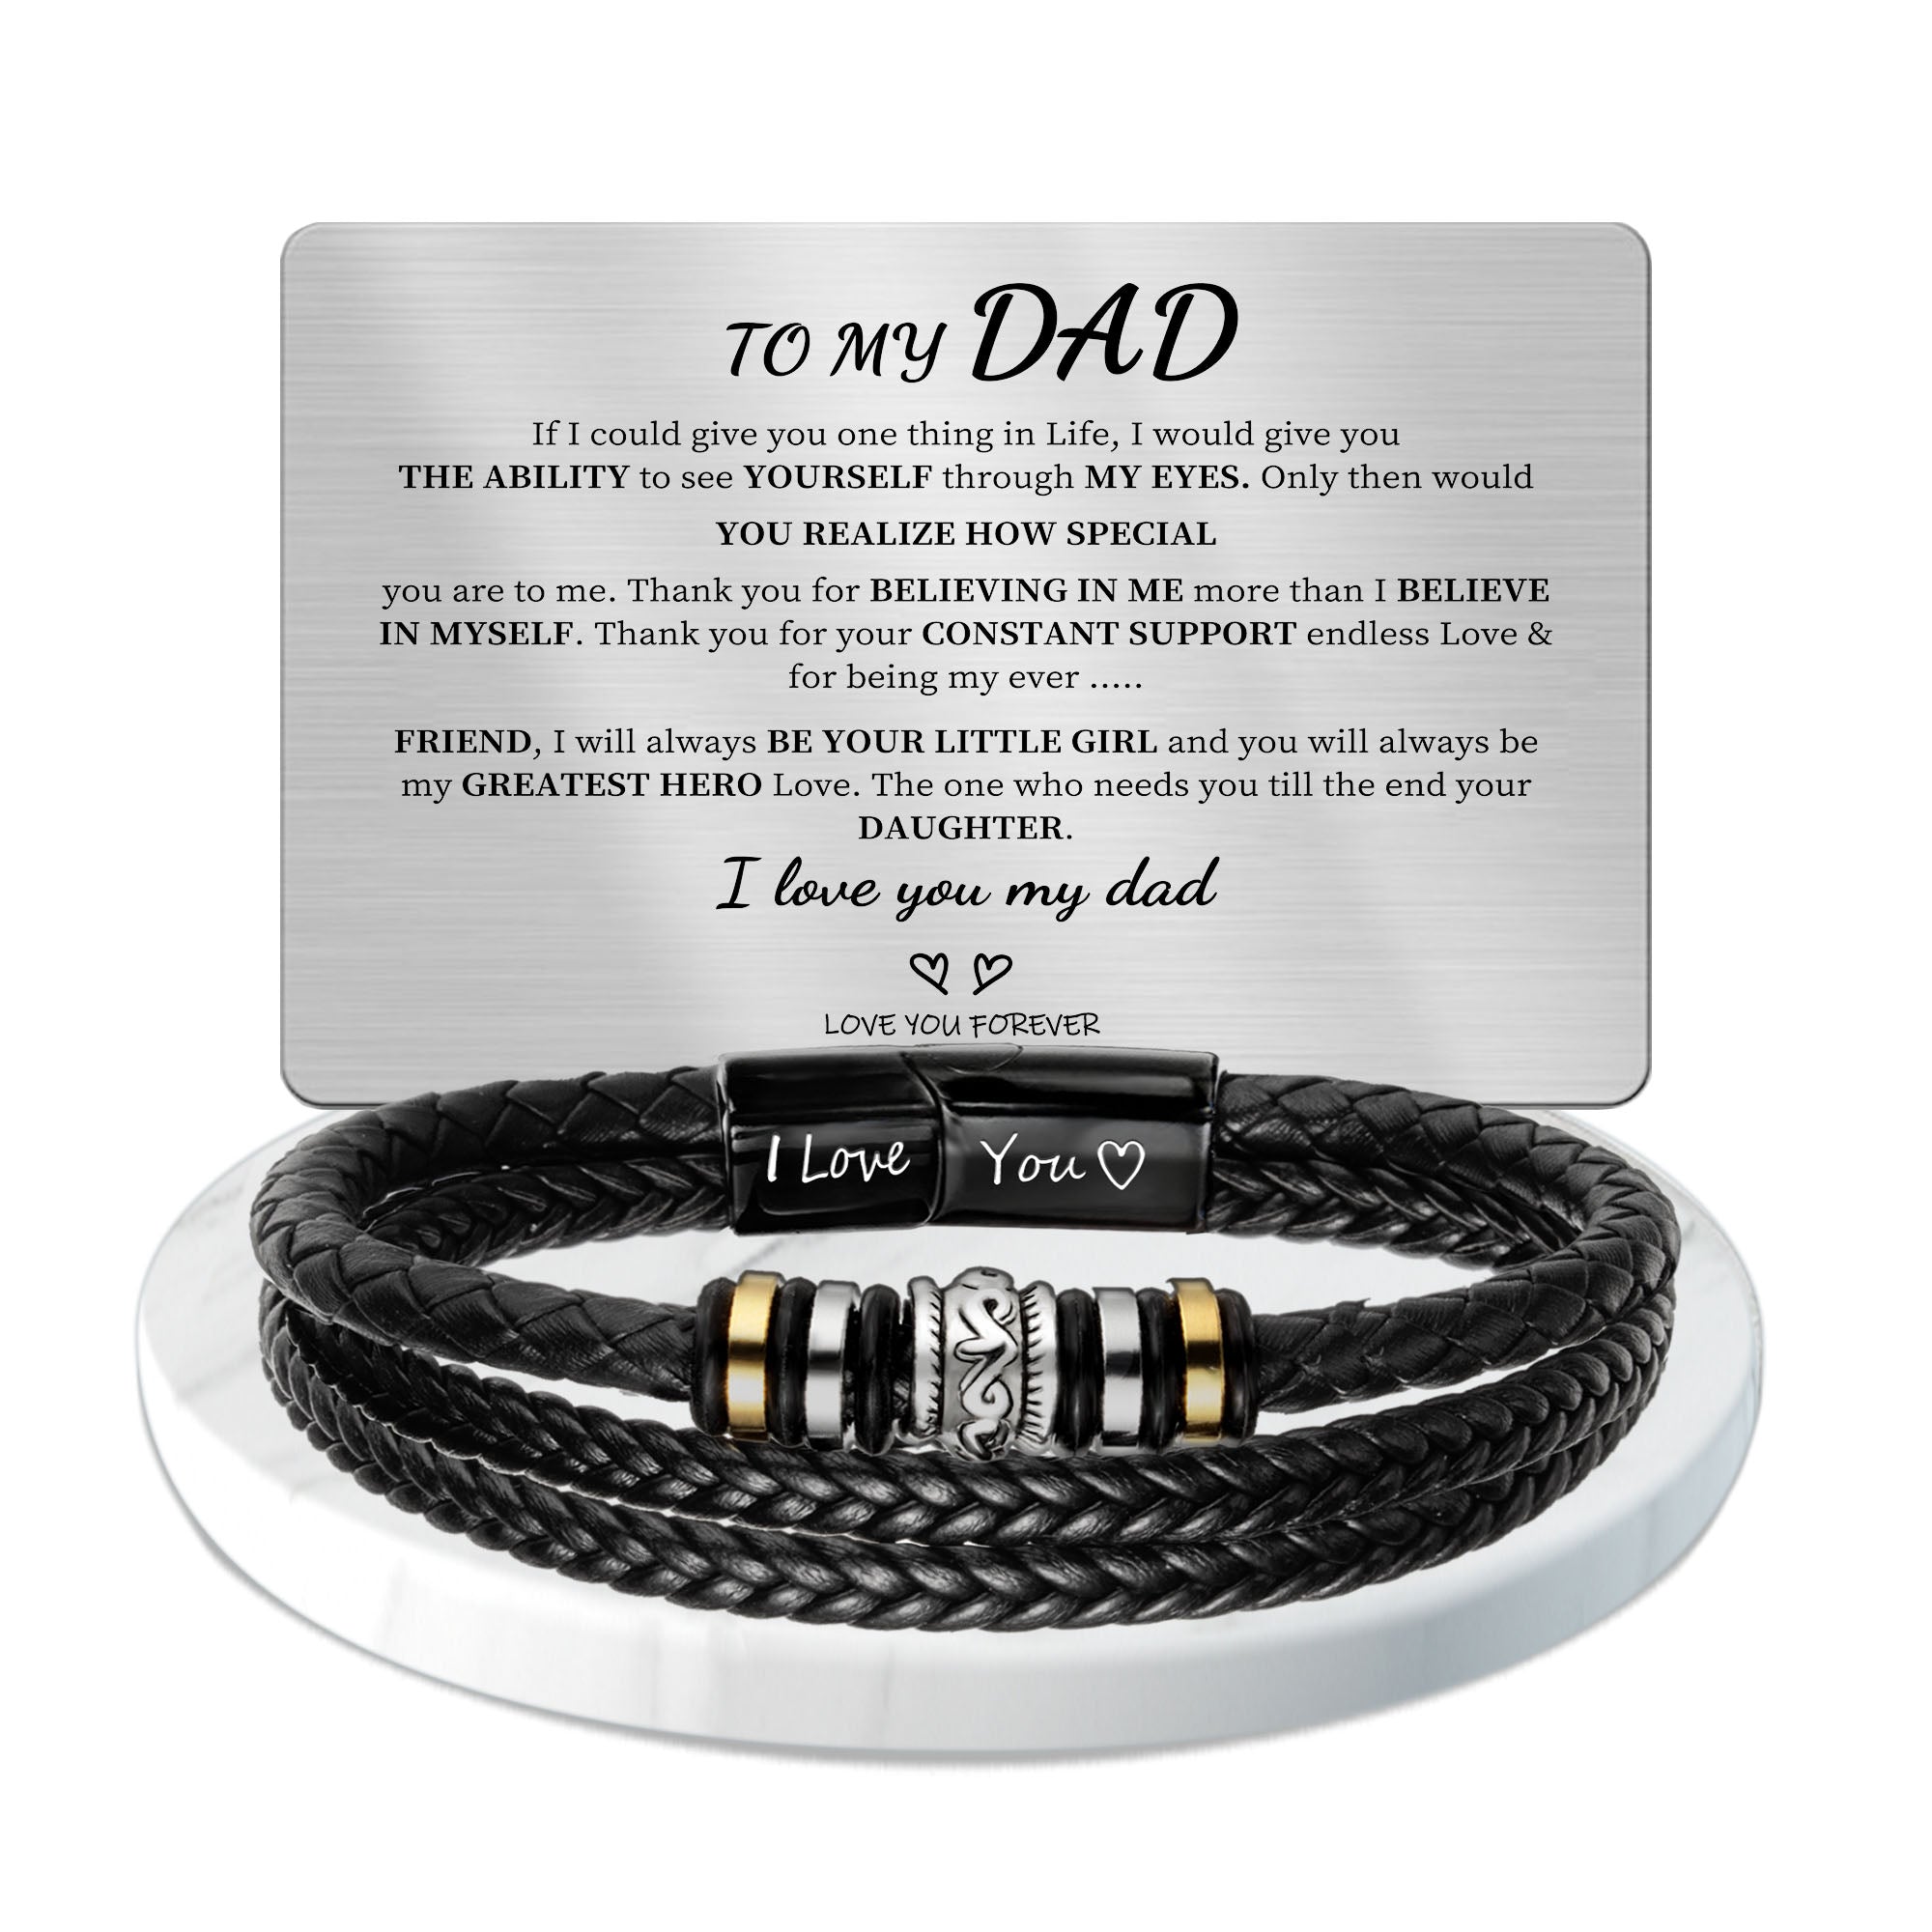 4 / To Dad / 9 inch